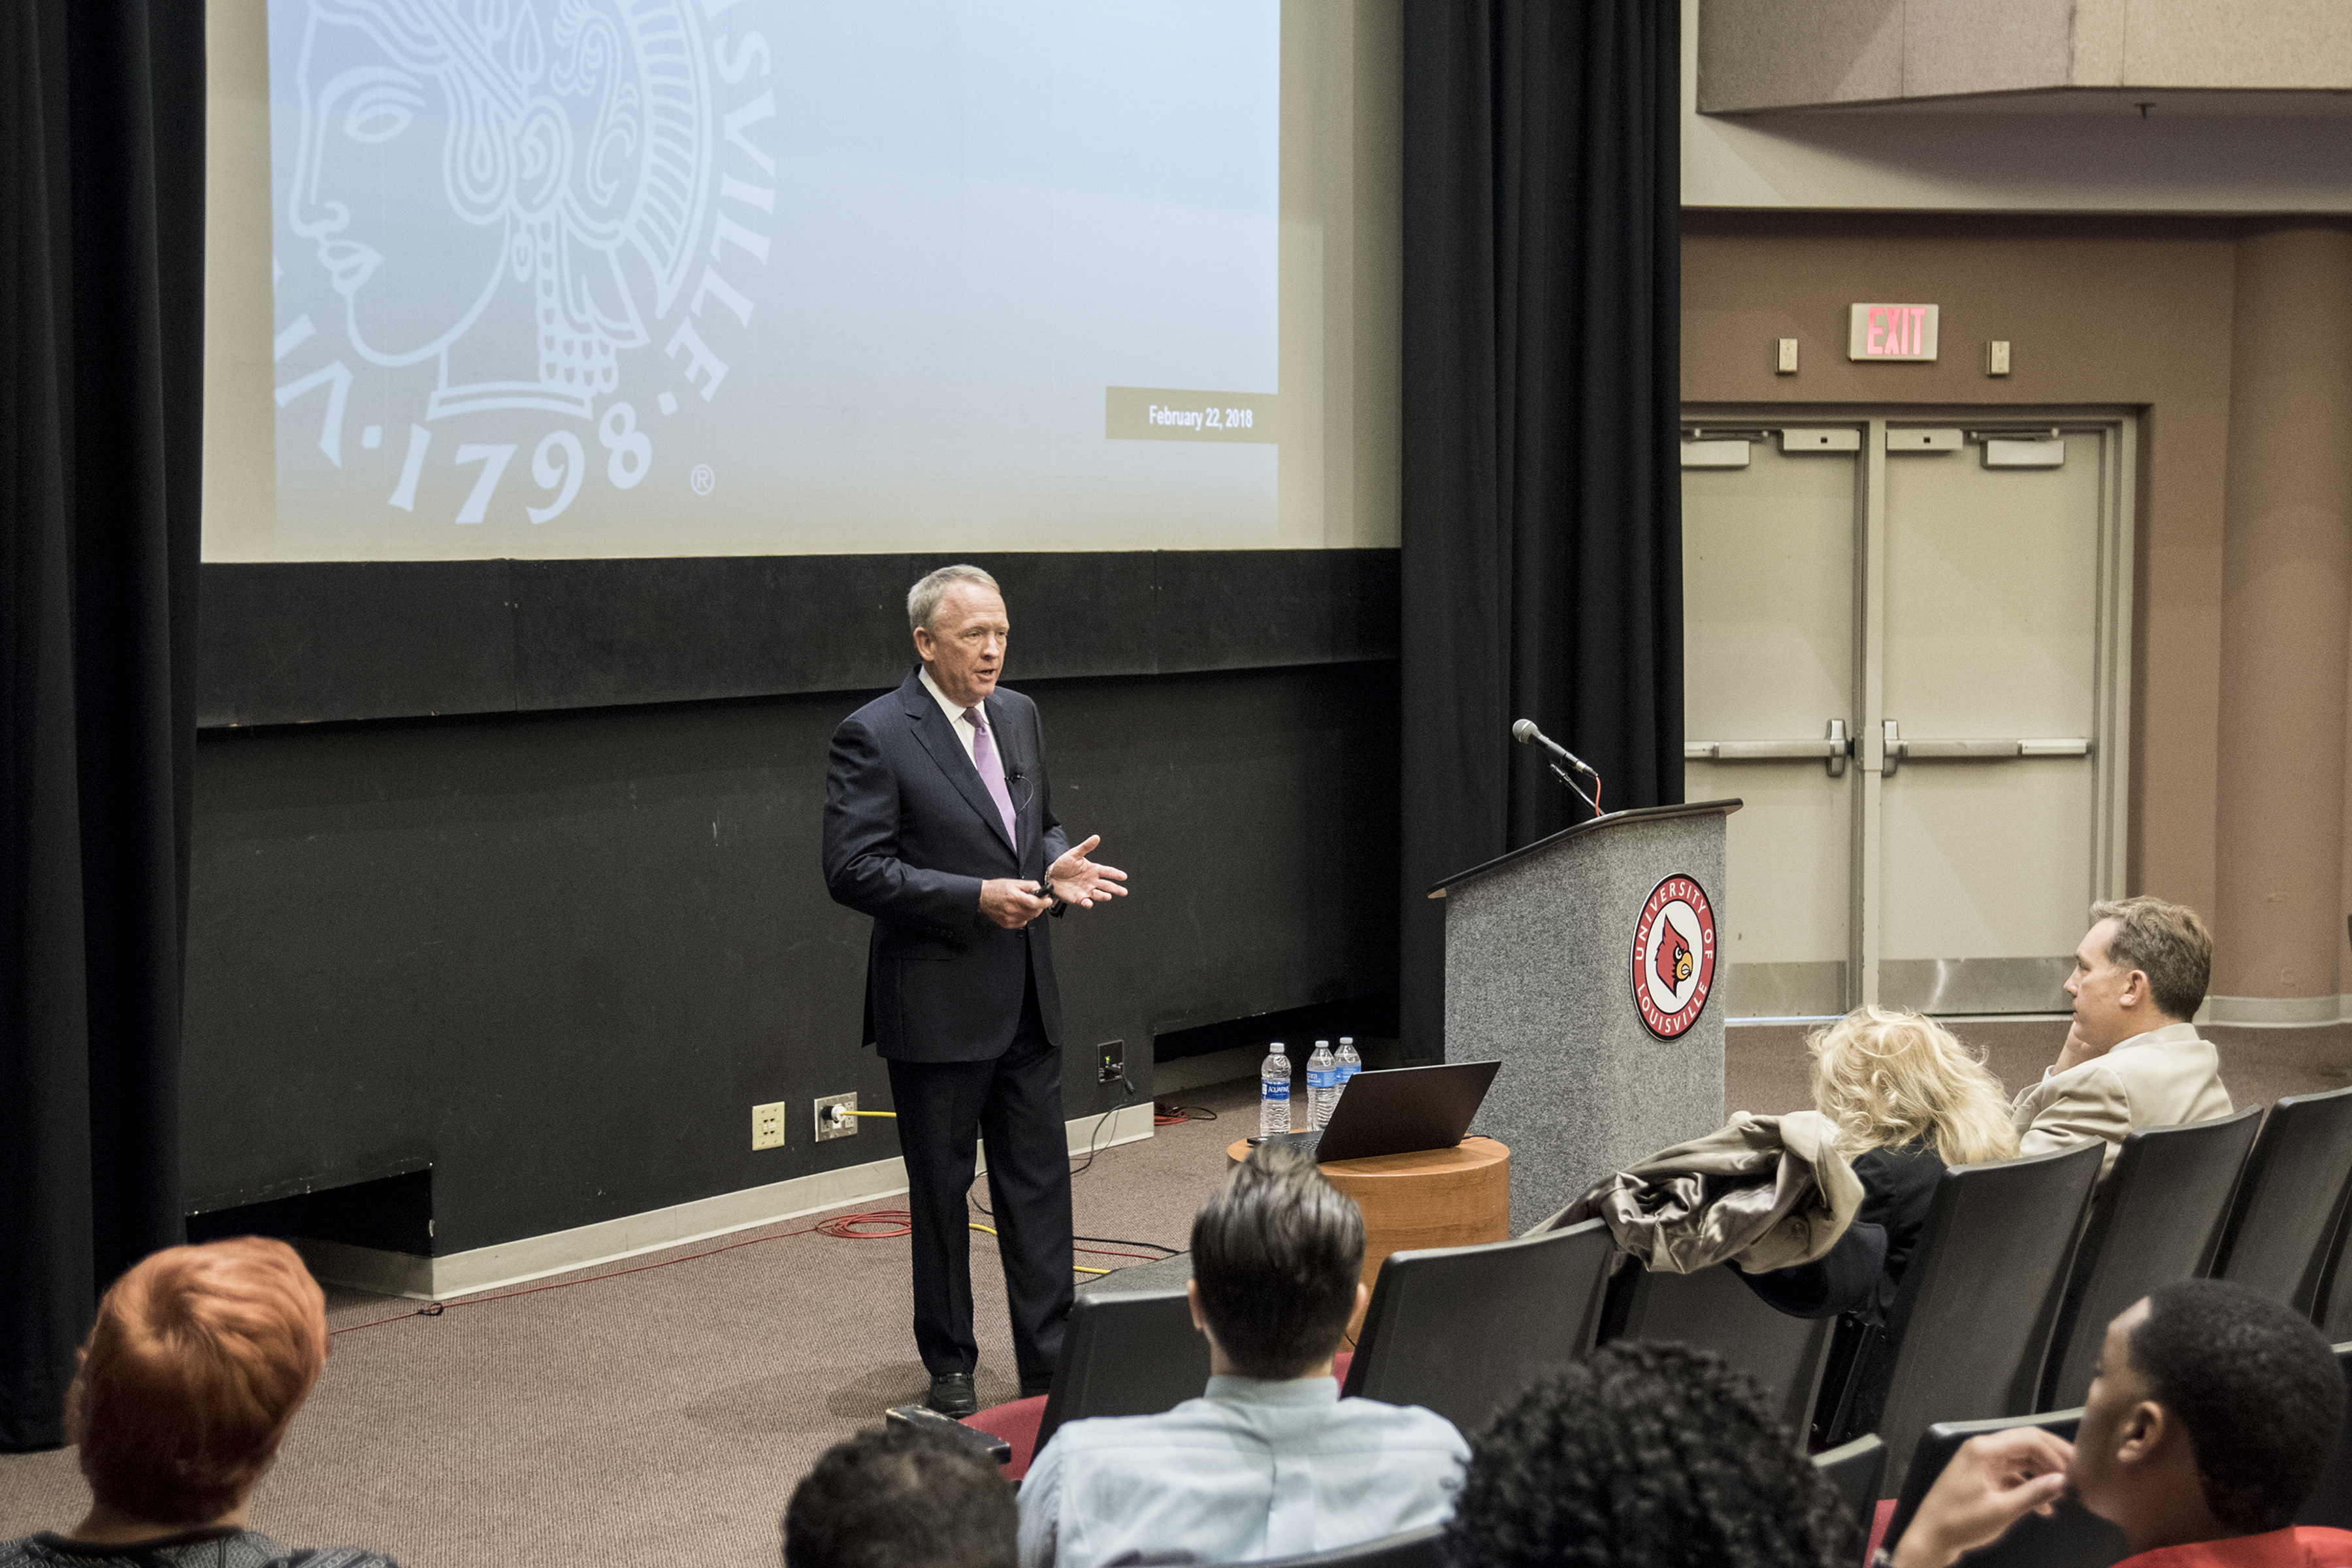 President Greg Postel hosted a budget forum to get employee input and ensure the process is collaborative.